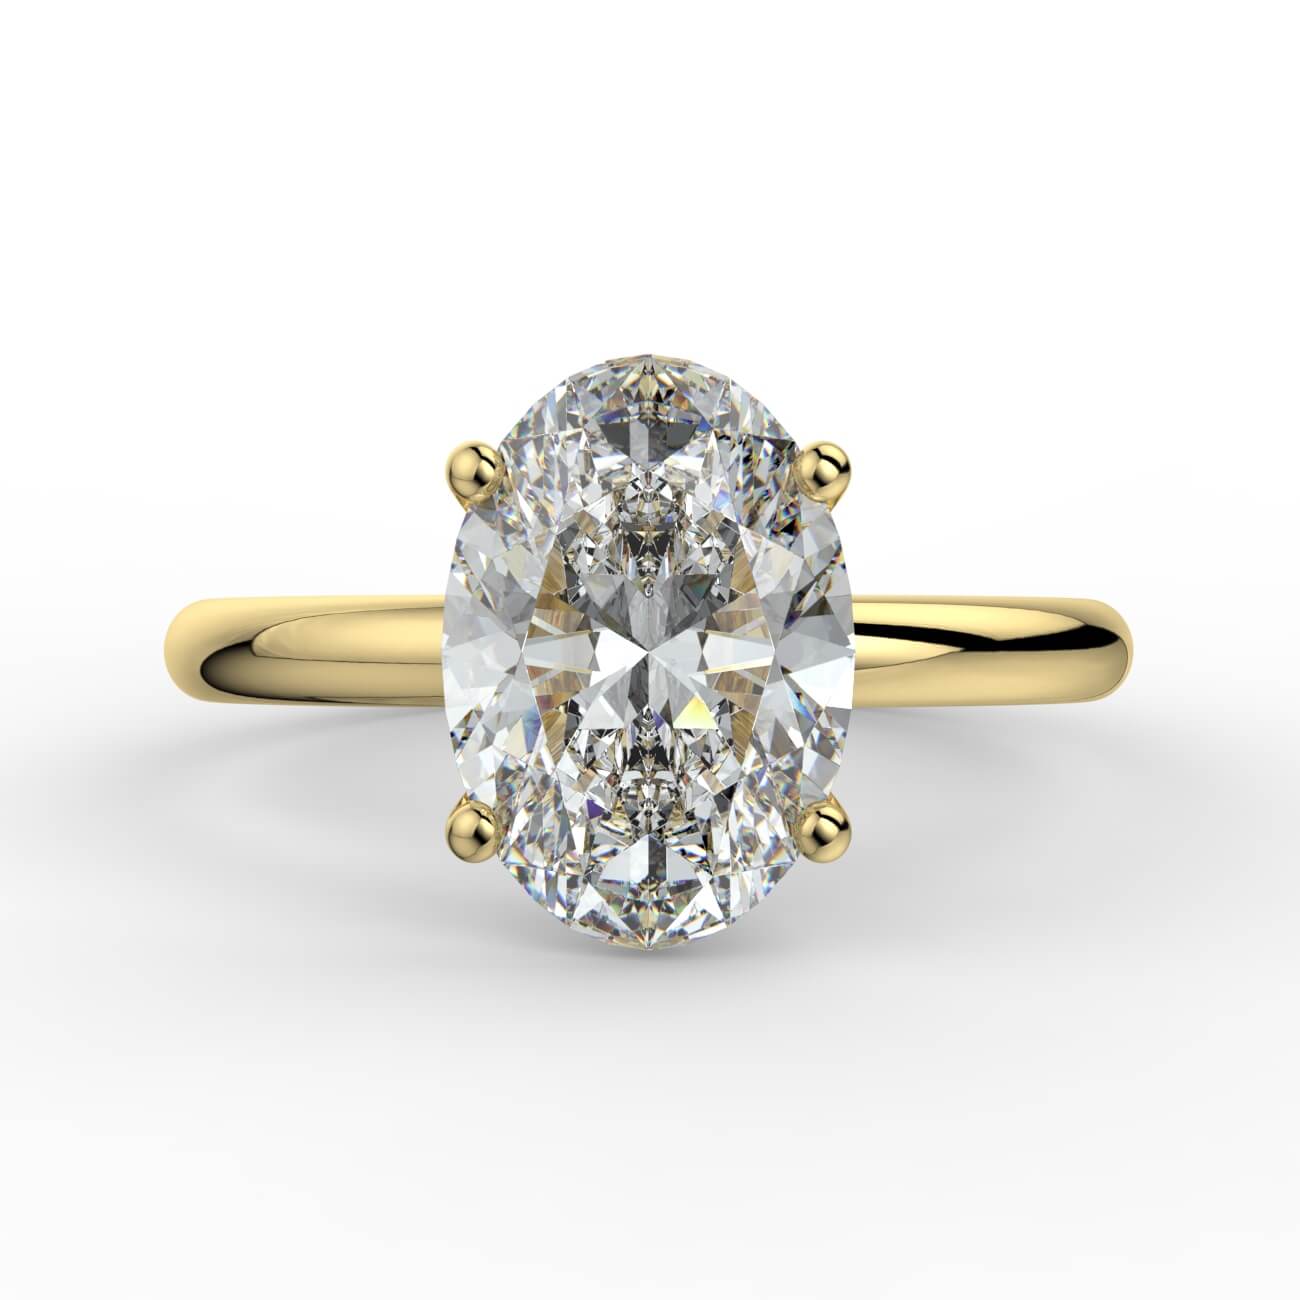 Solitaire oval diamond engagement ring in yellow gold – Australian Diamond Network